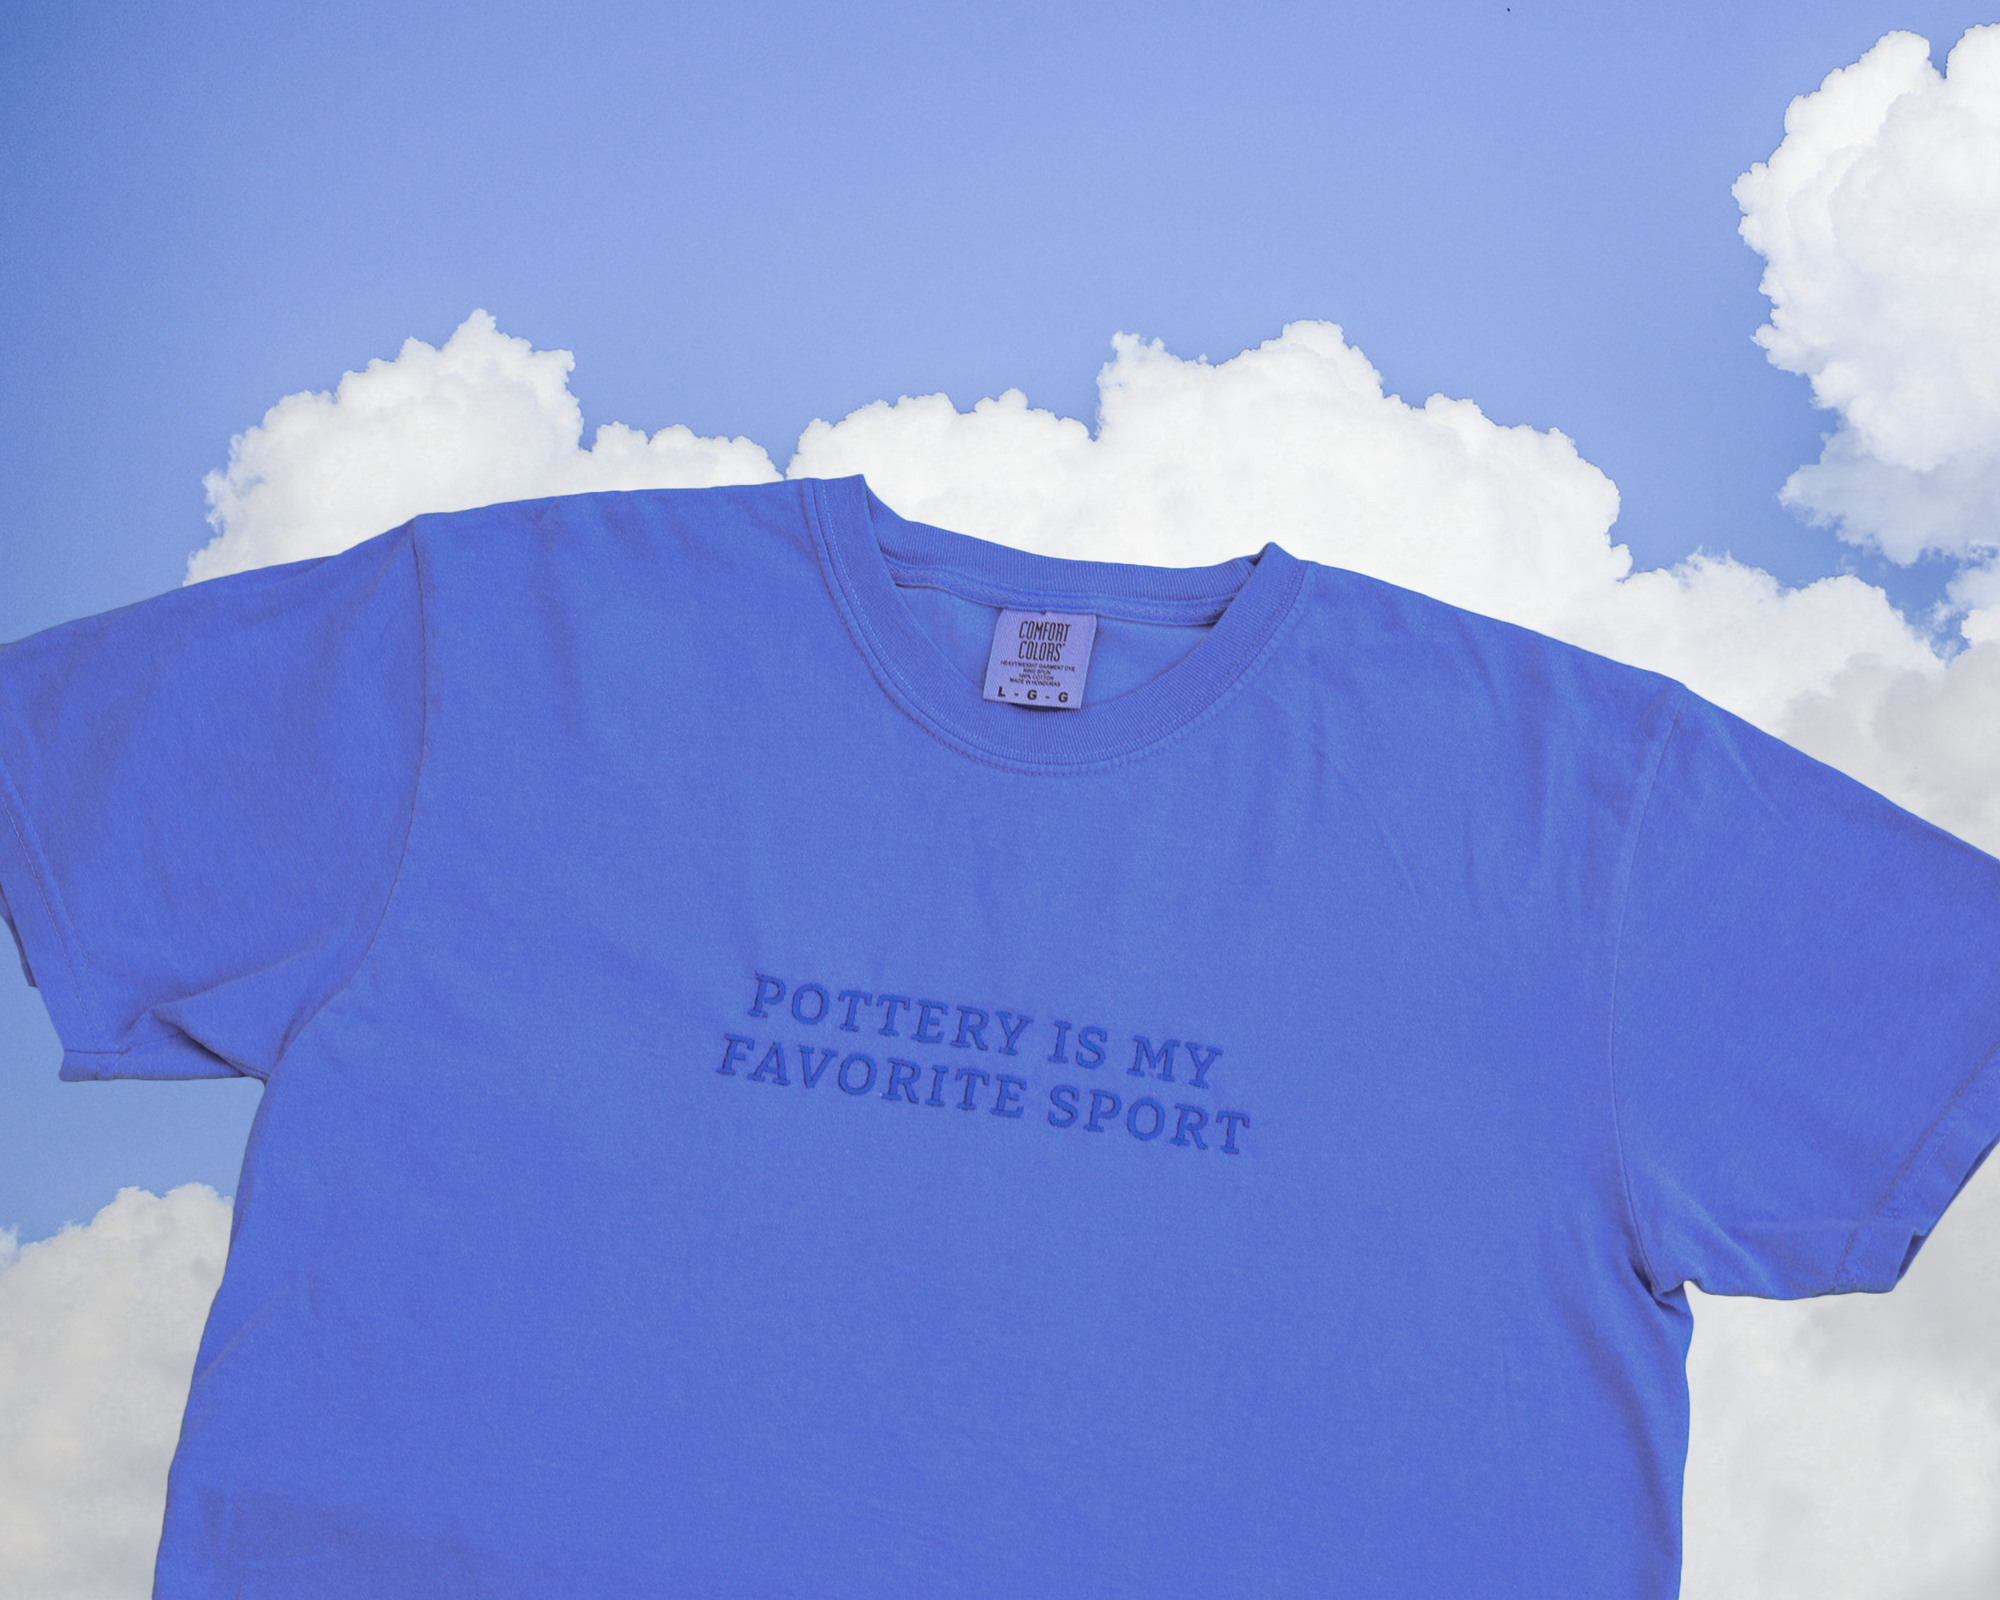 Pottery Is My Favorite Sport Shirt - Blueberry